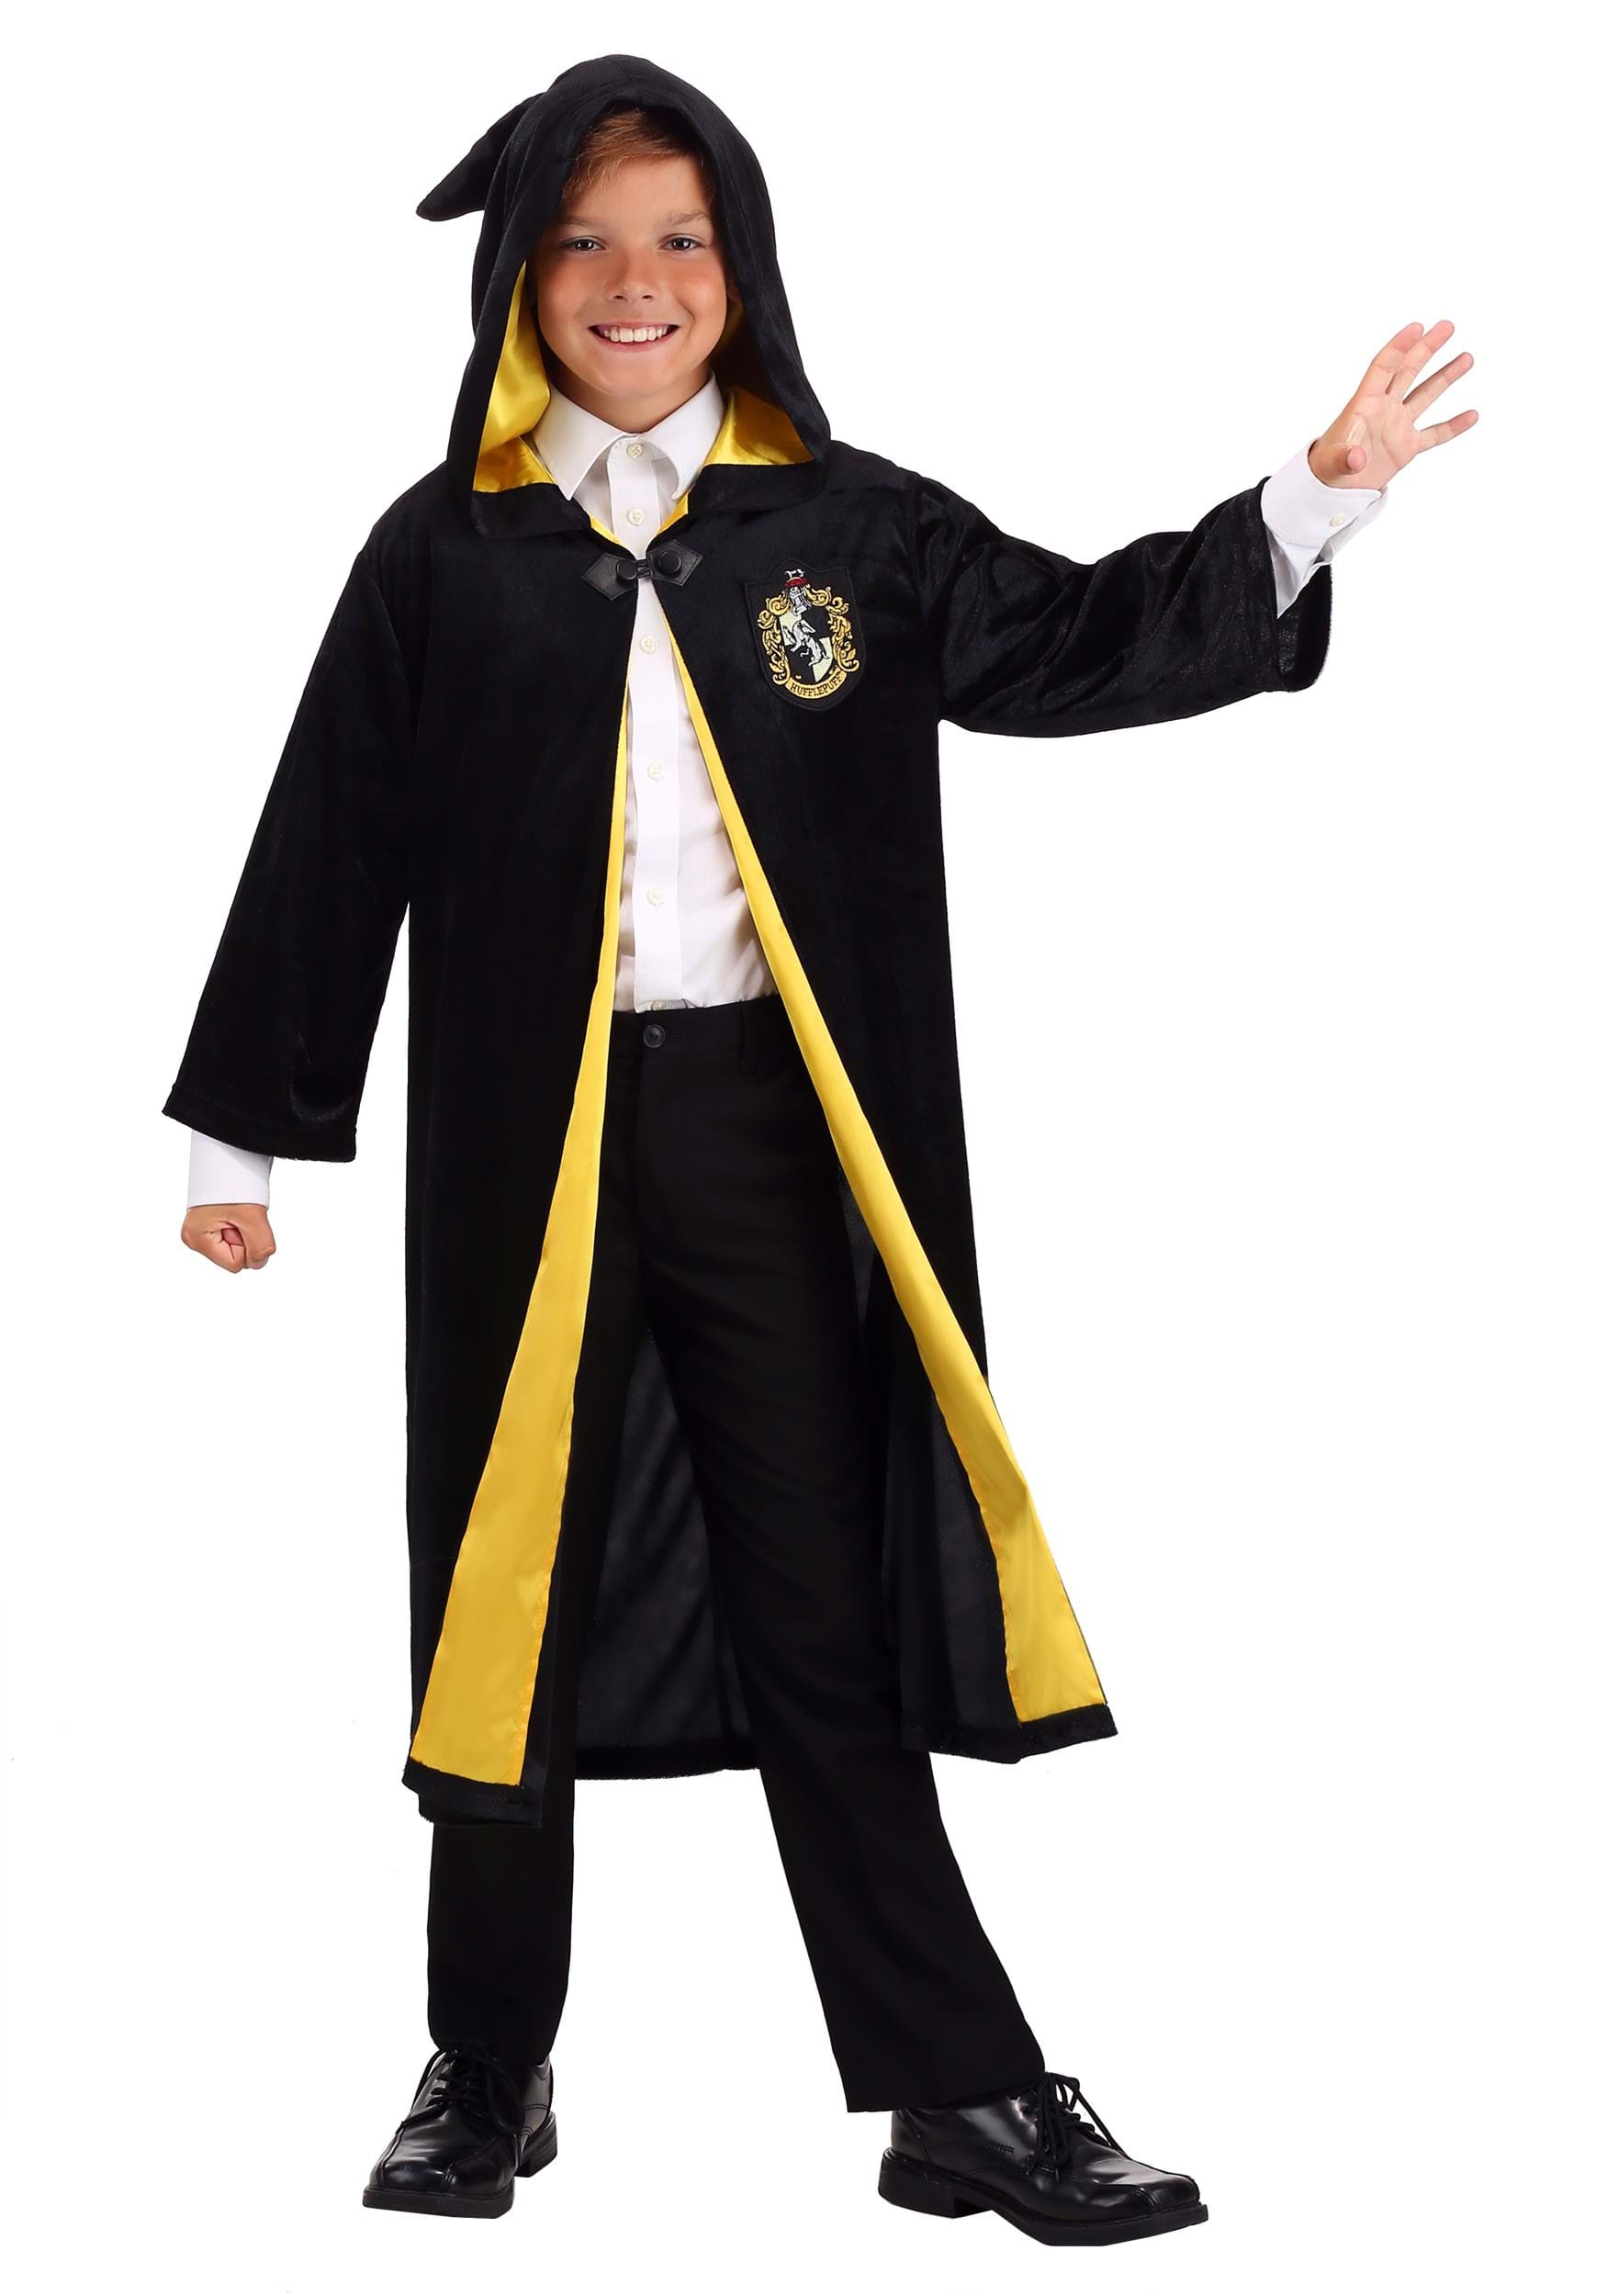  Rubie's Adult Harry Potter Ravenclaw Robe, X-Small : Clothing,  Shoes & Jewelry